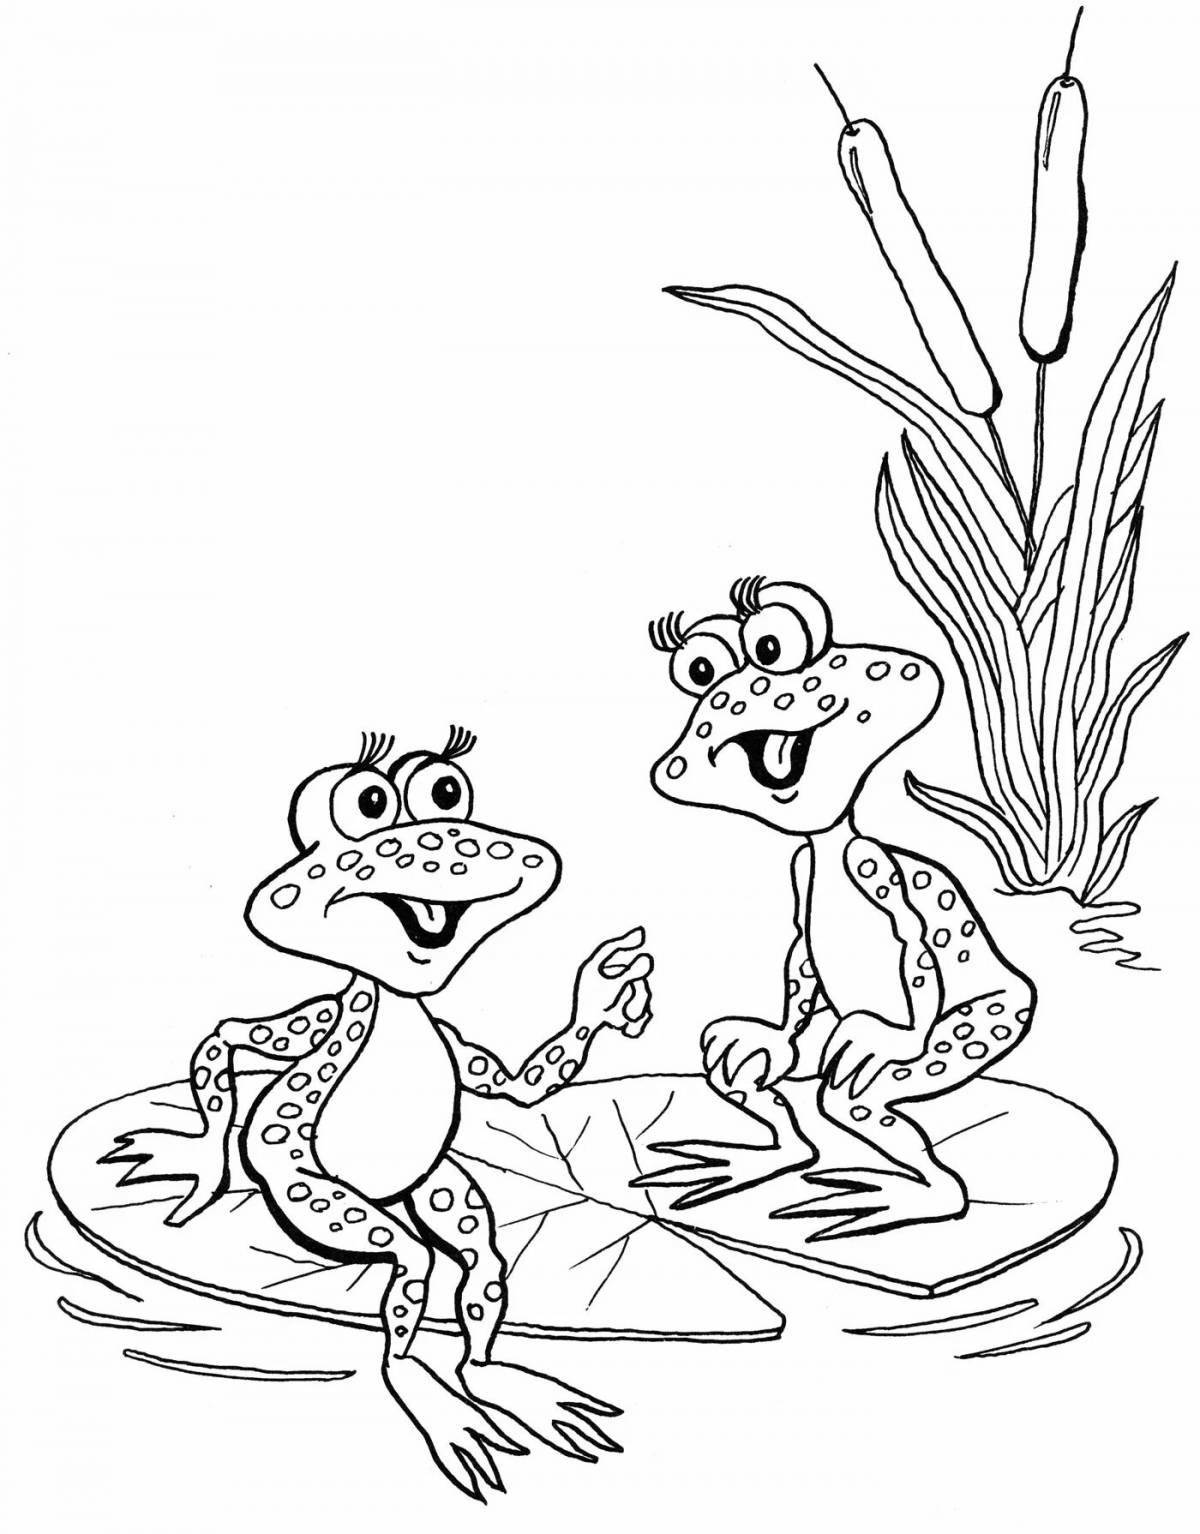 Adorable travel frog coloring page